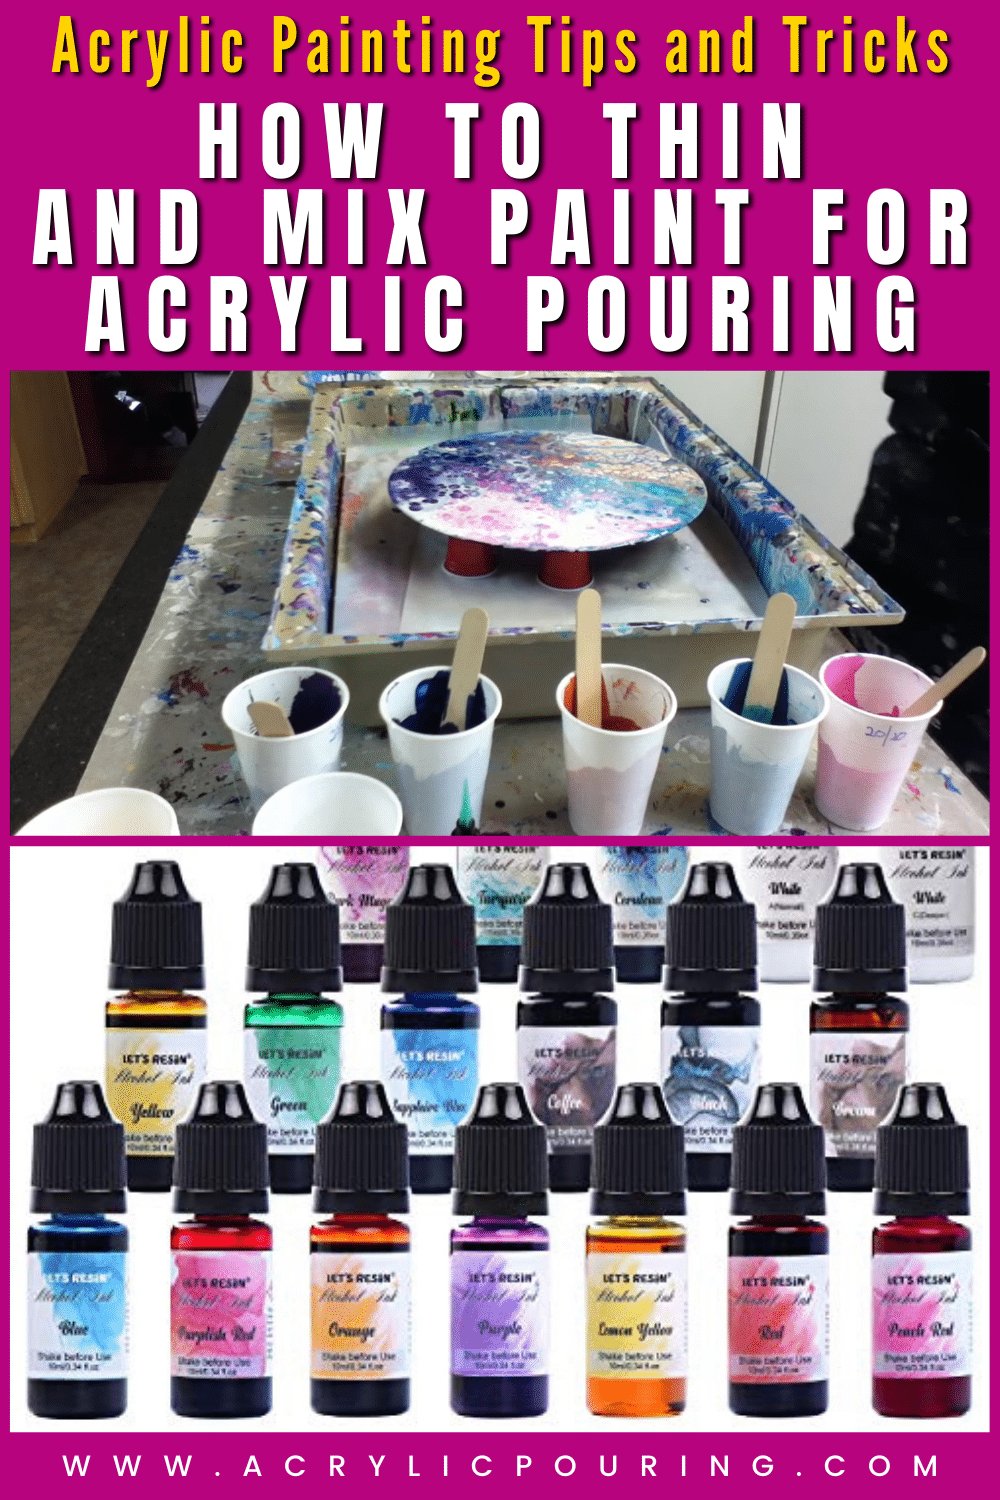 Acrylic Pouring Ratio Guide: Floetrol, Liquitex and More